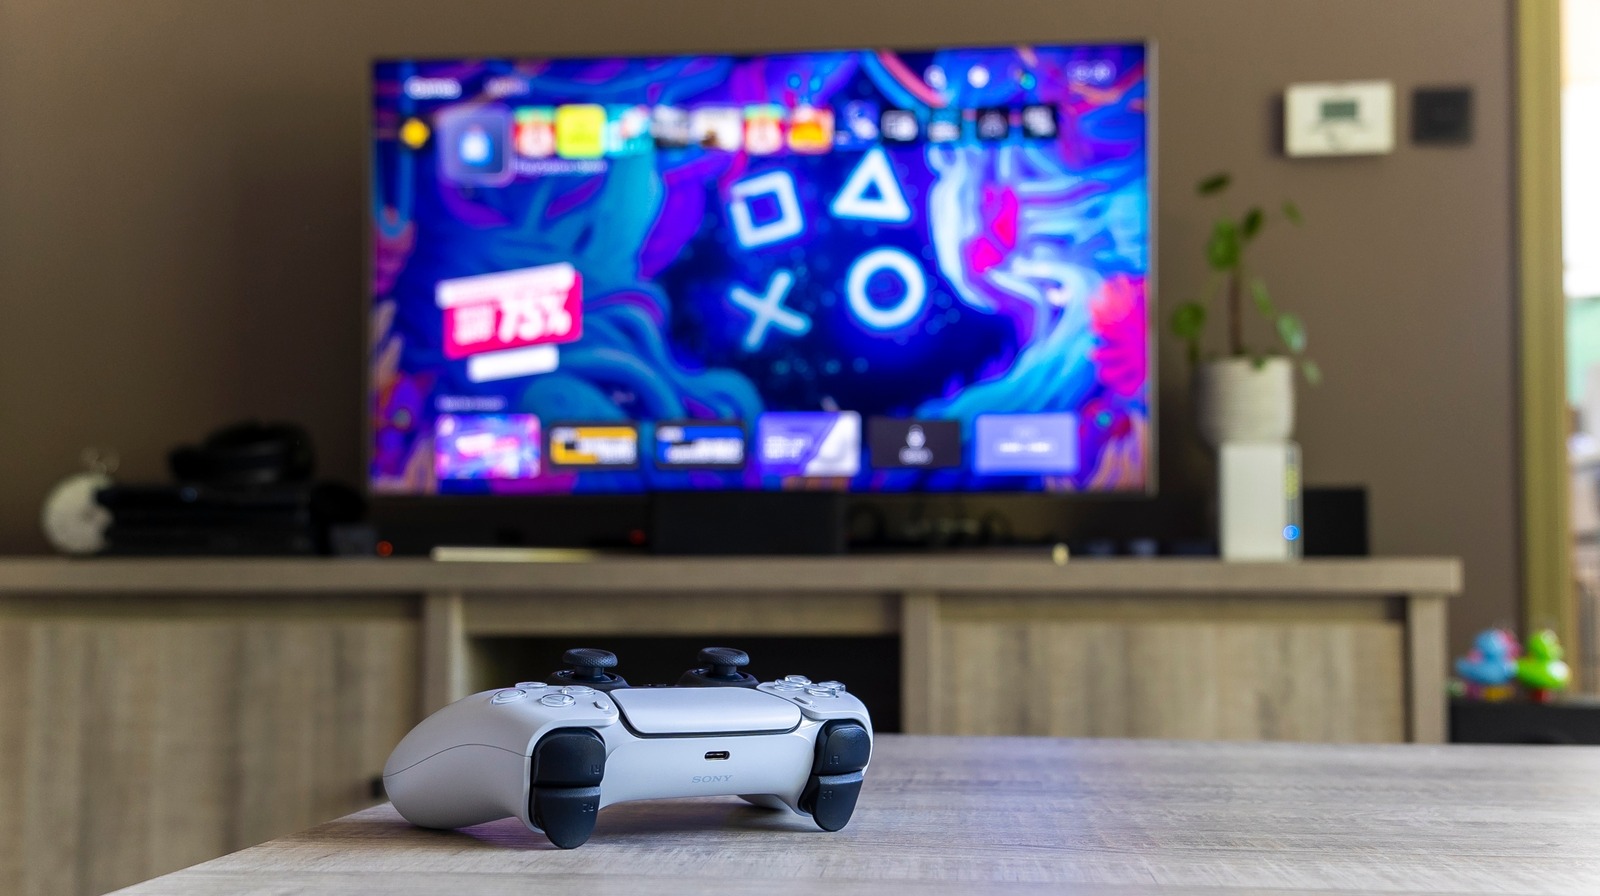 The best gaming TVs for PS5, Xbox Series X and more